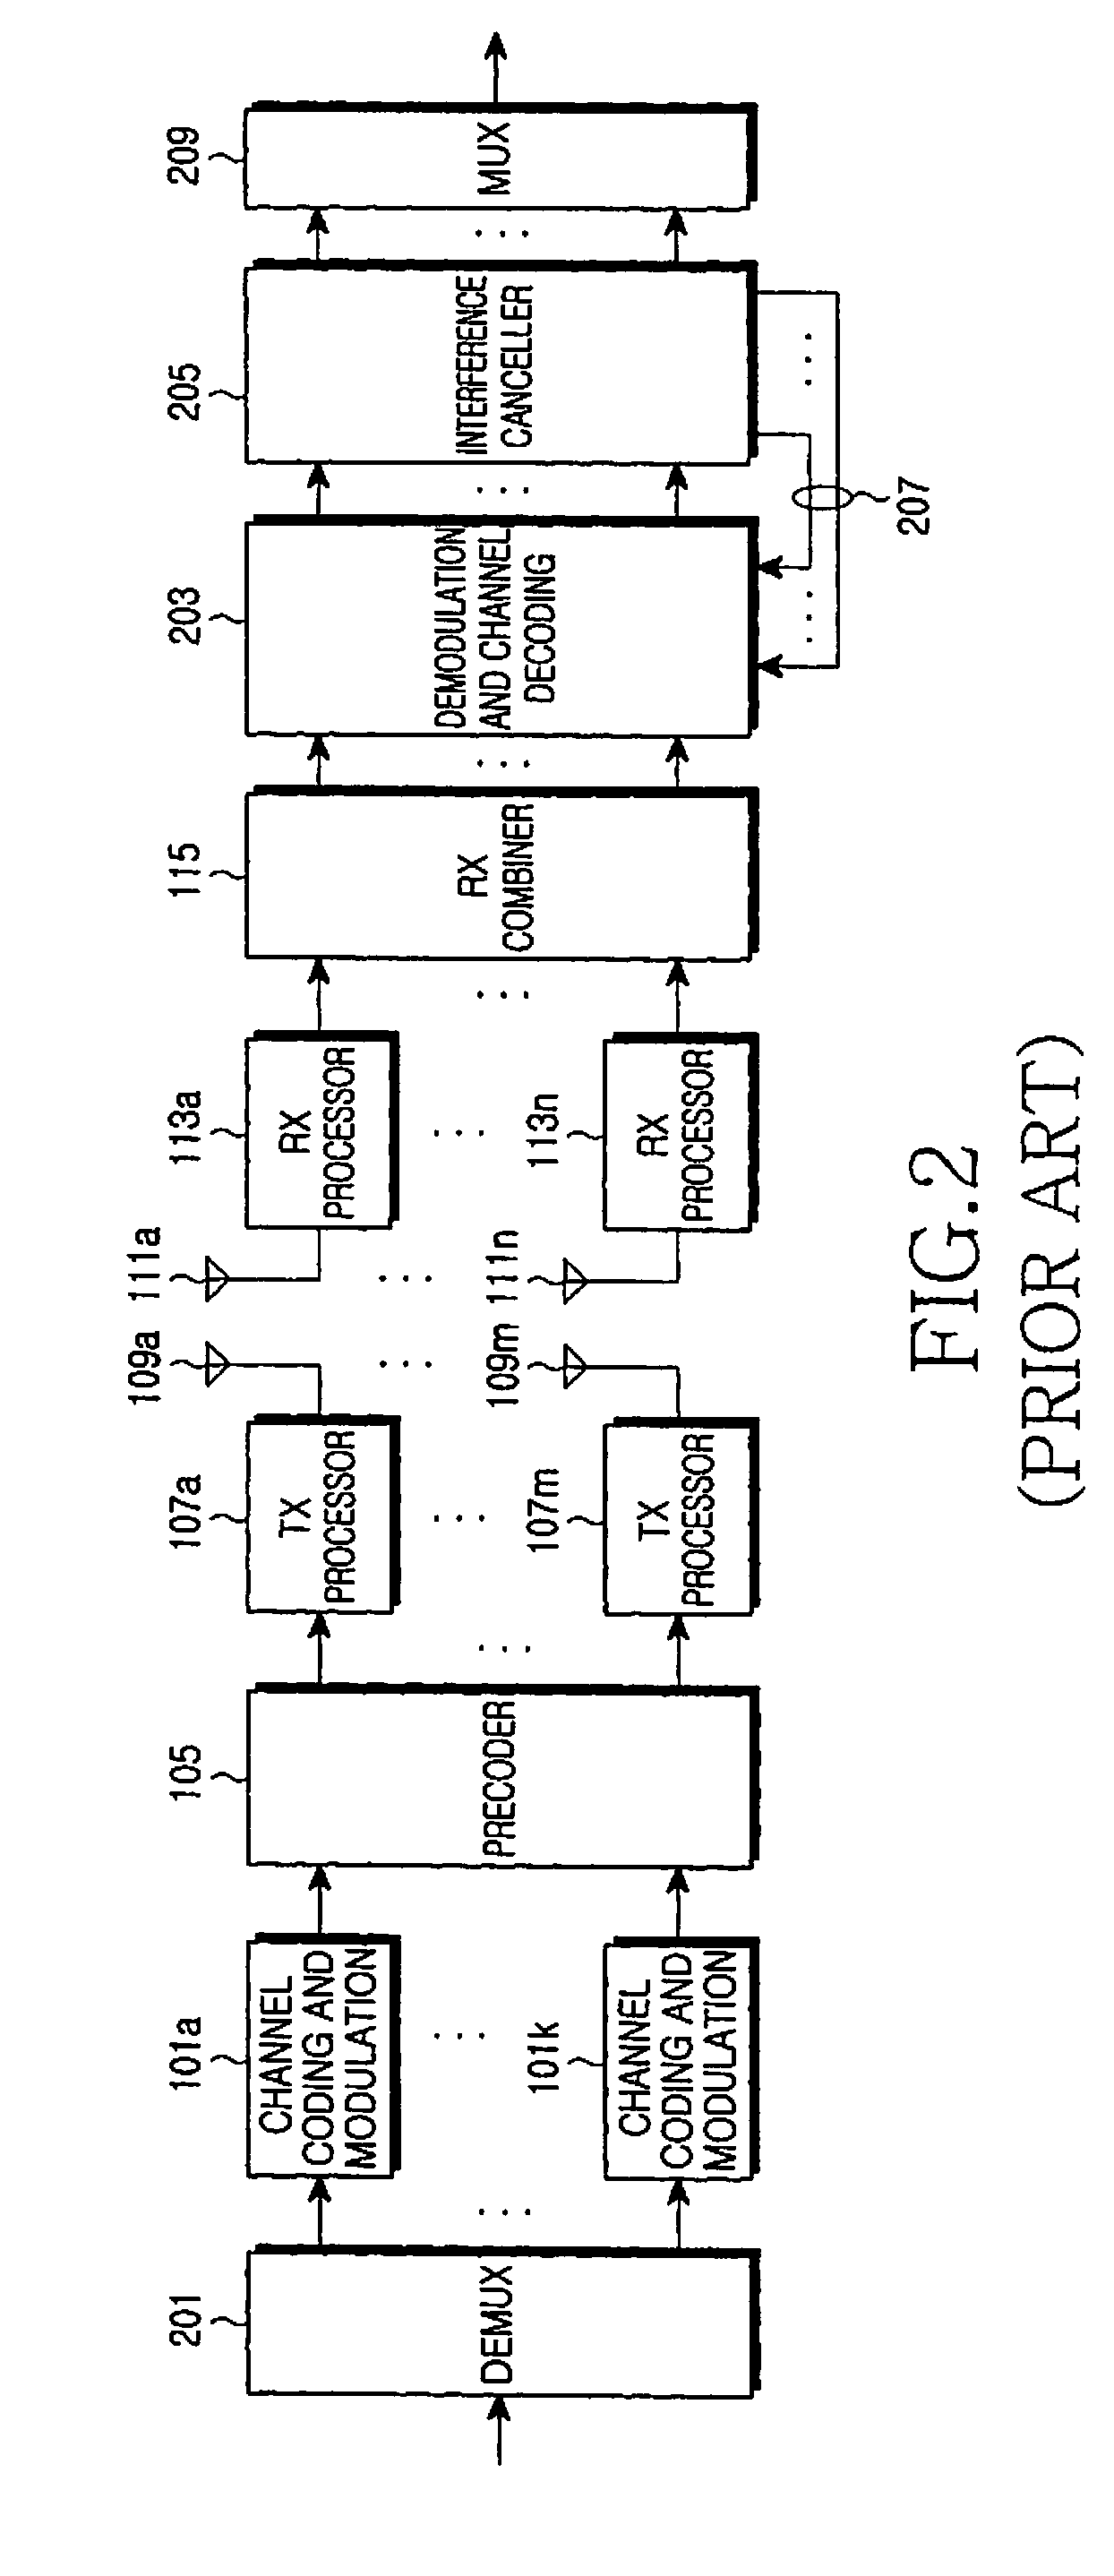 Method and apparatus for transmitting and receiving shared control channel message in a wireless communication system using orthogonal frequency division multiple access